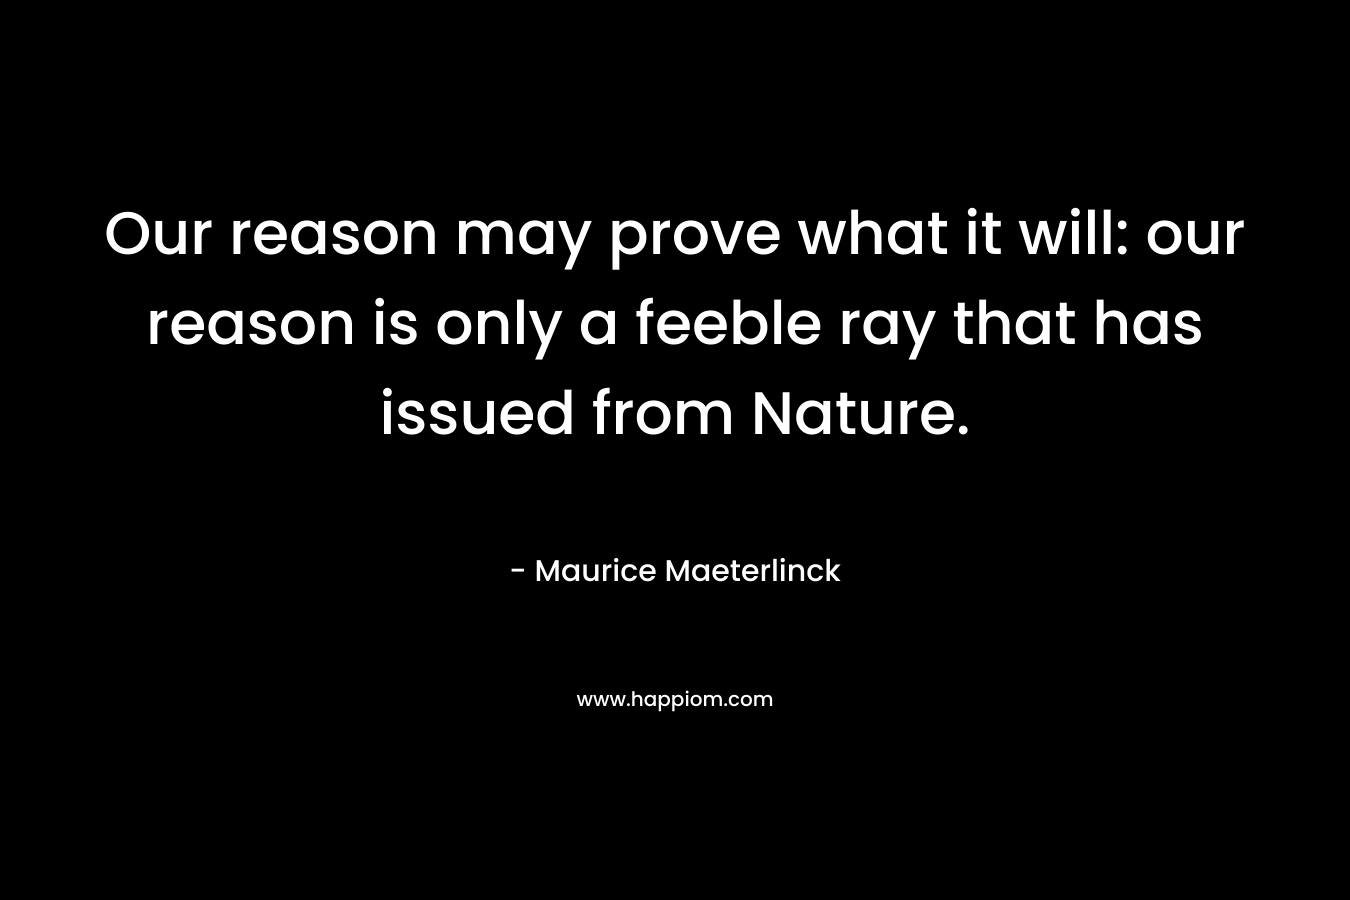 Our reason may prove what it will: our reason is only a feeble ray that has issued from Nature. – Maurice Maeterlinck